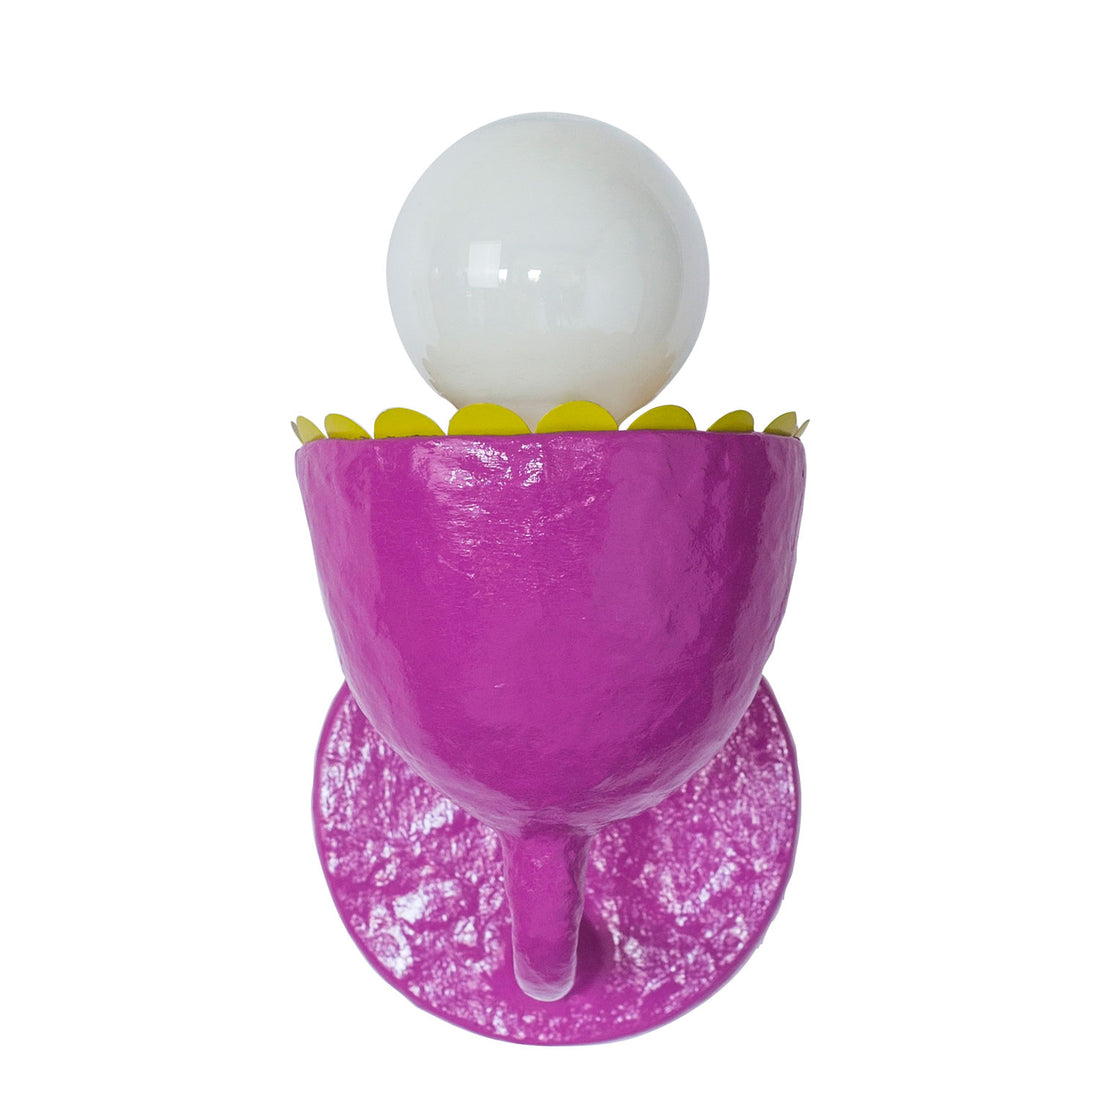 Millie Wall Sconce in purple paper mache and scallop